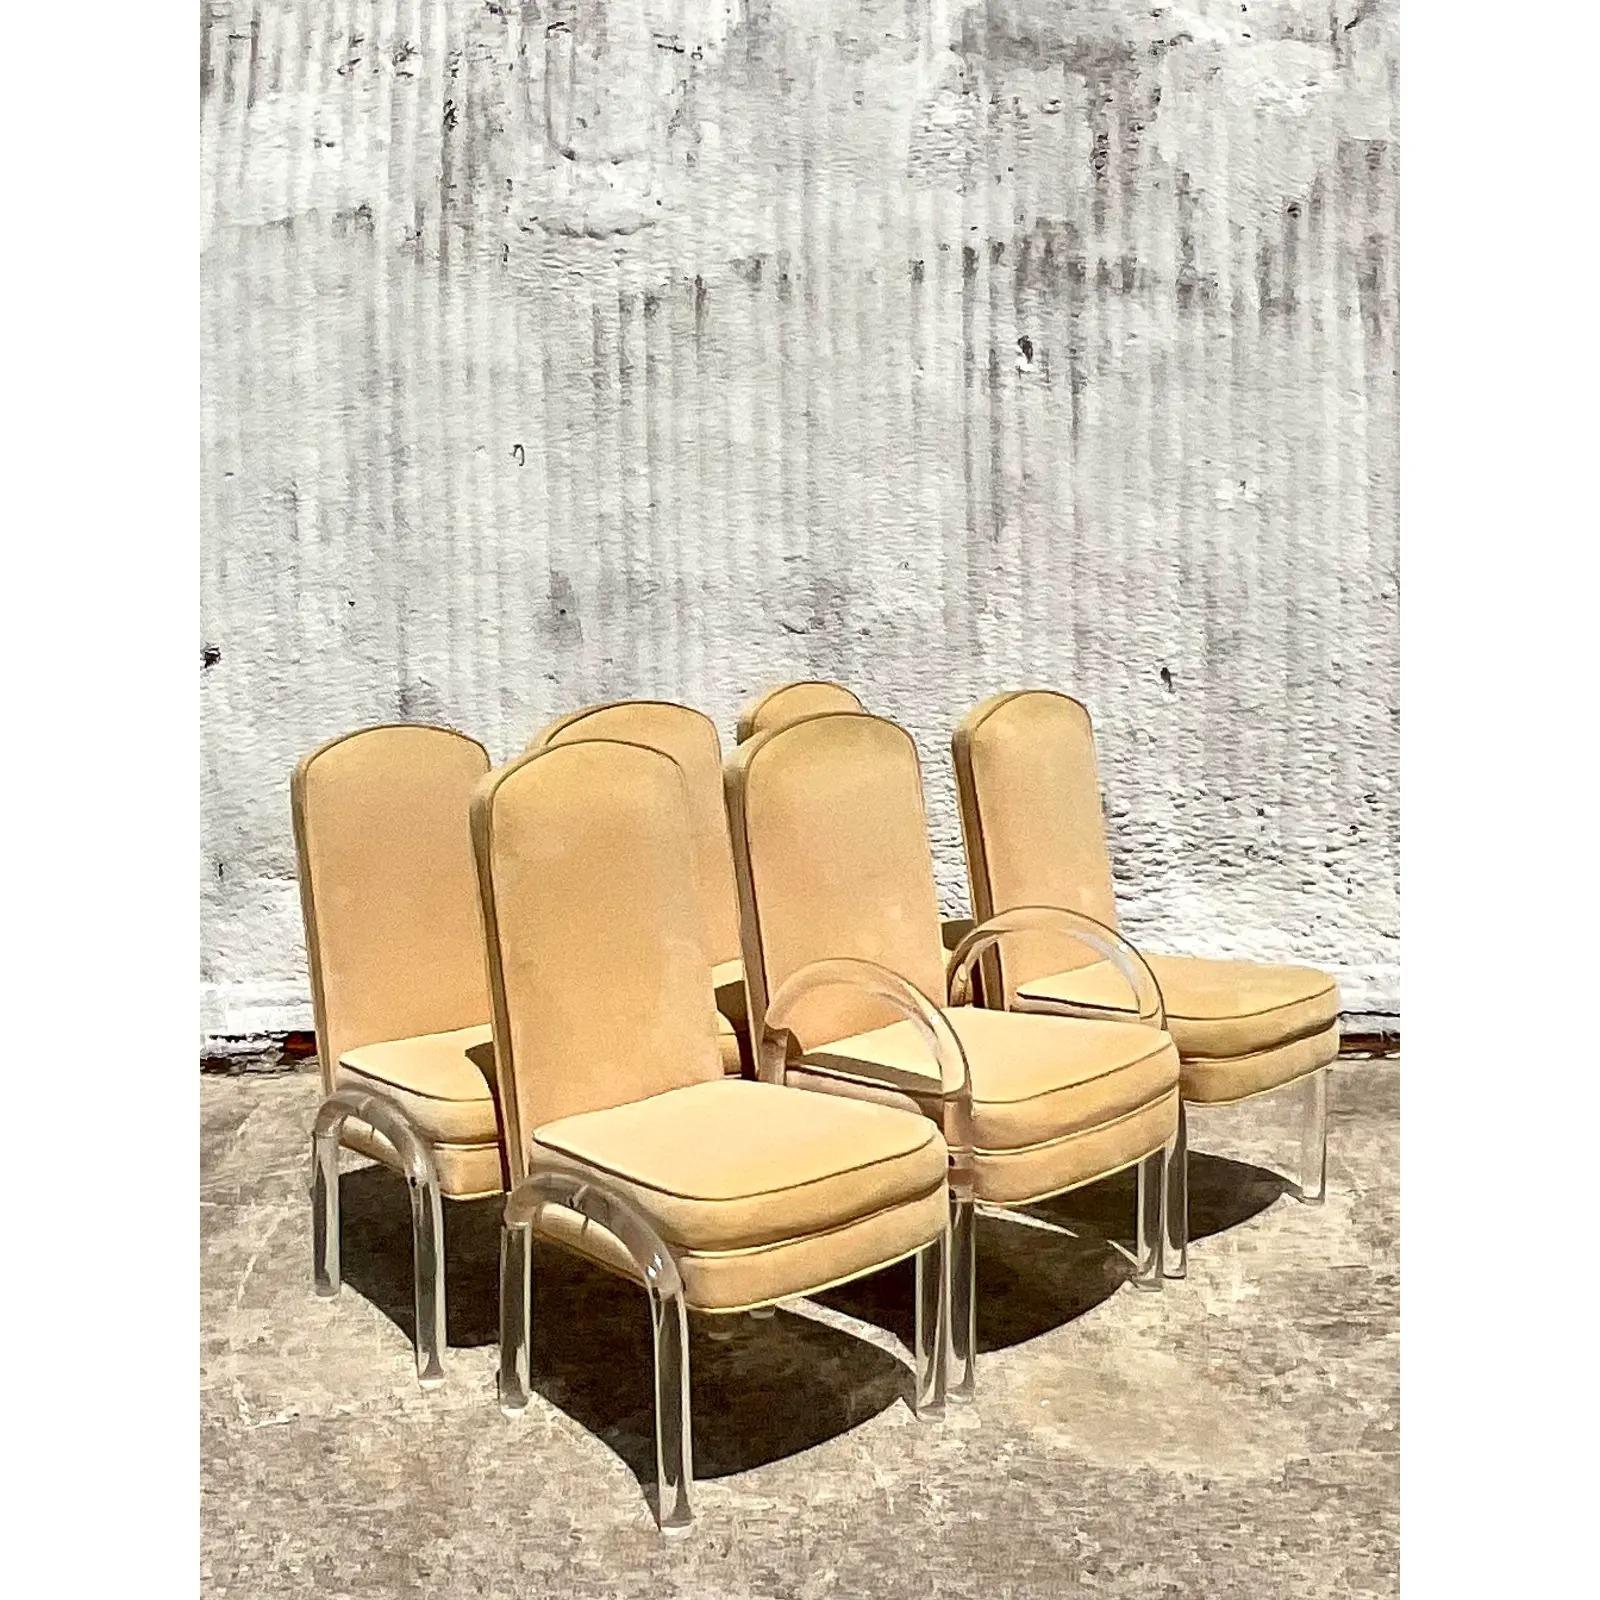 Stunning set of 6 vintage Contemporary dining chairs. A chic design with thick rods of lucite bent into an arched design. Stunning ultra suede upholstery in a soft yellow color. Matching dining table also available.